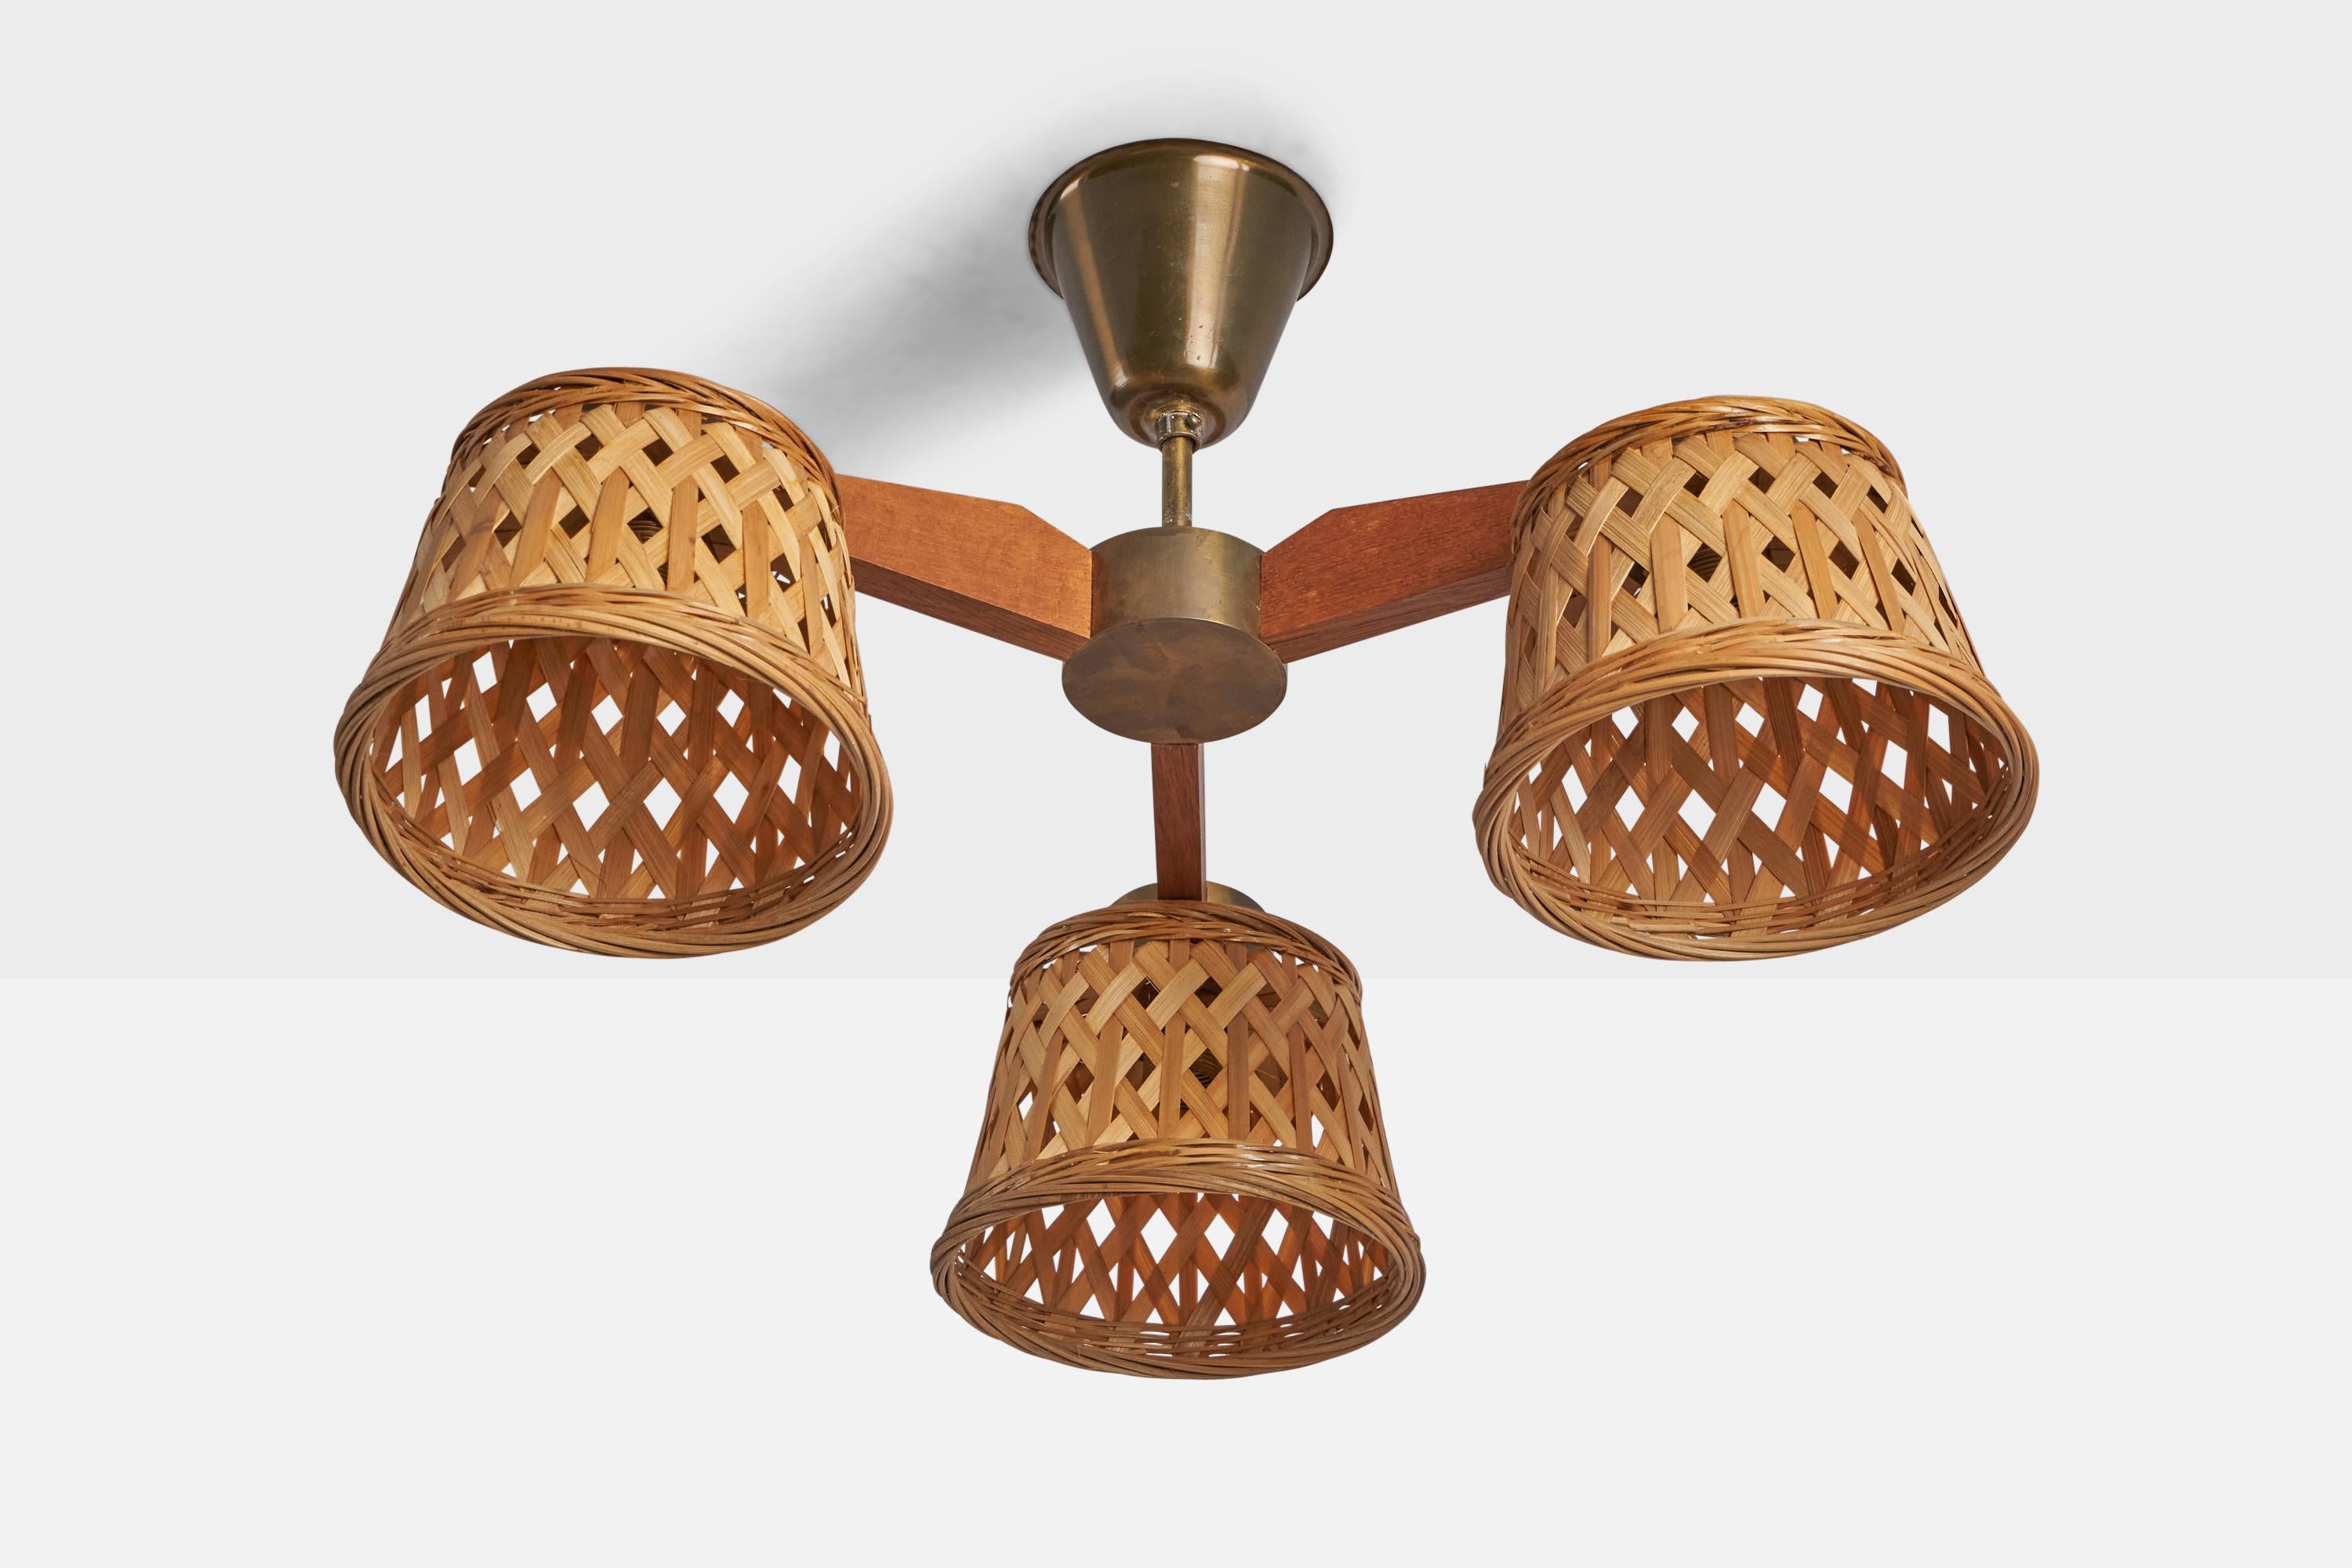 A three-armed brass, teak and rattan chandelier designed and produced in Sweden, c. 1950s.

Overall Dimensions (inches): 10.75” H x 18” Diameter
Bulb Specifications: E-14 Bulb
Number of Sockets: 3
Assorted vintage rattan lampshades.